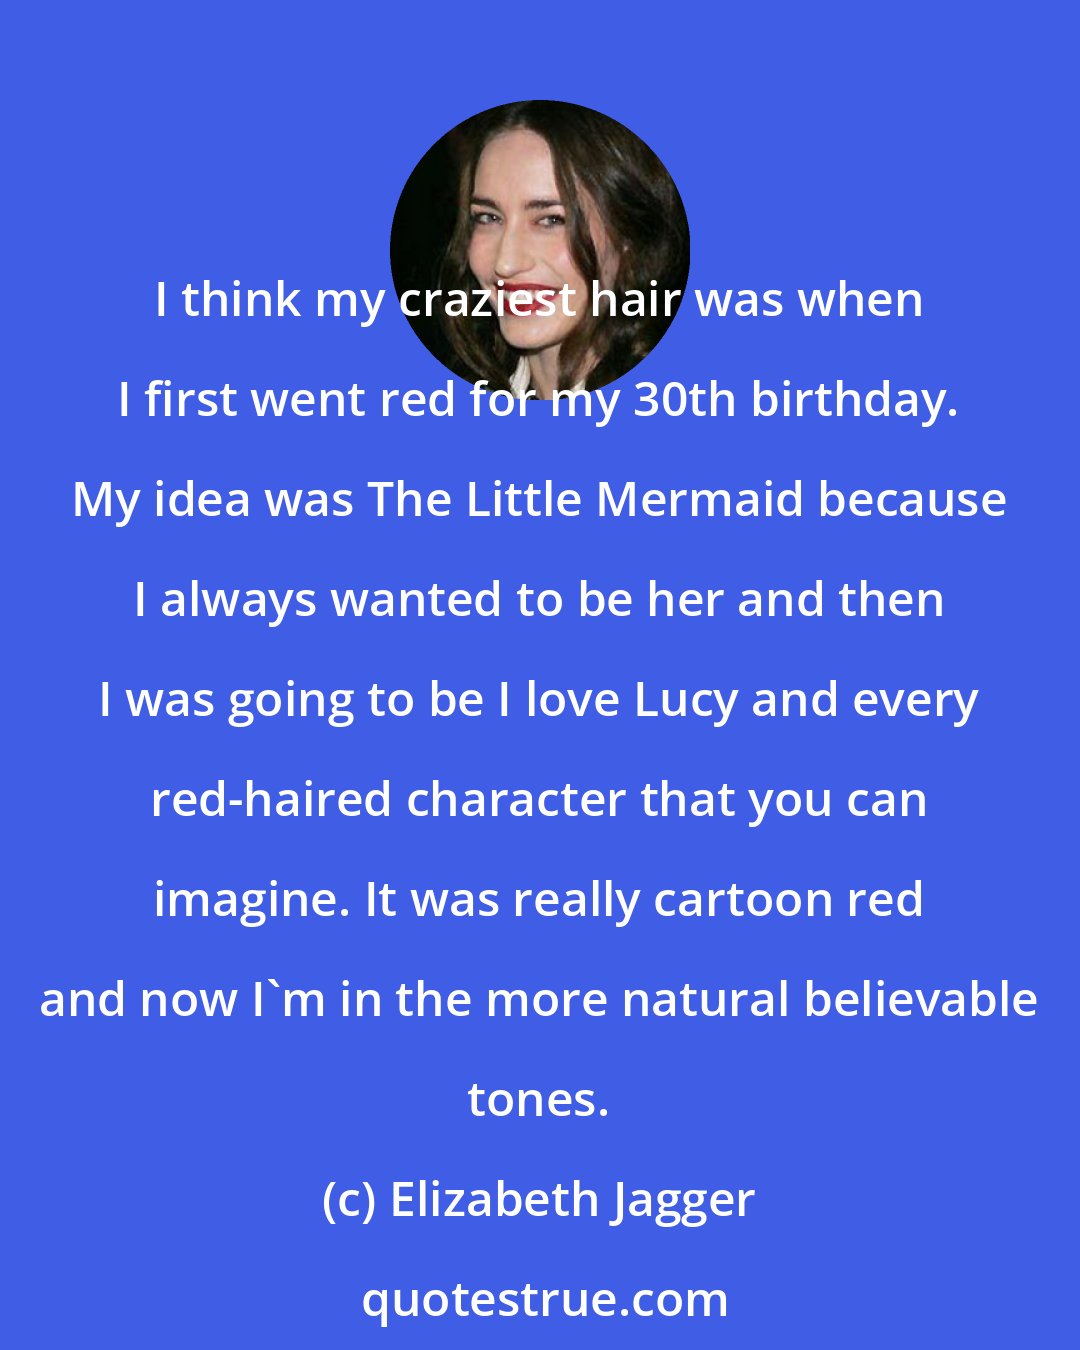 Elizabeth Jagger: I think my craziest hair was when I first went red for my 30th birthday. My idea was The Little Mermaid because I always wanted to be her and then I was going to be I love Lucy and every red-haired character that you can imagine. It was really cartoon red and now I'm in the more natural believable tones.